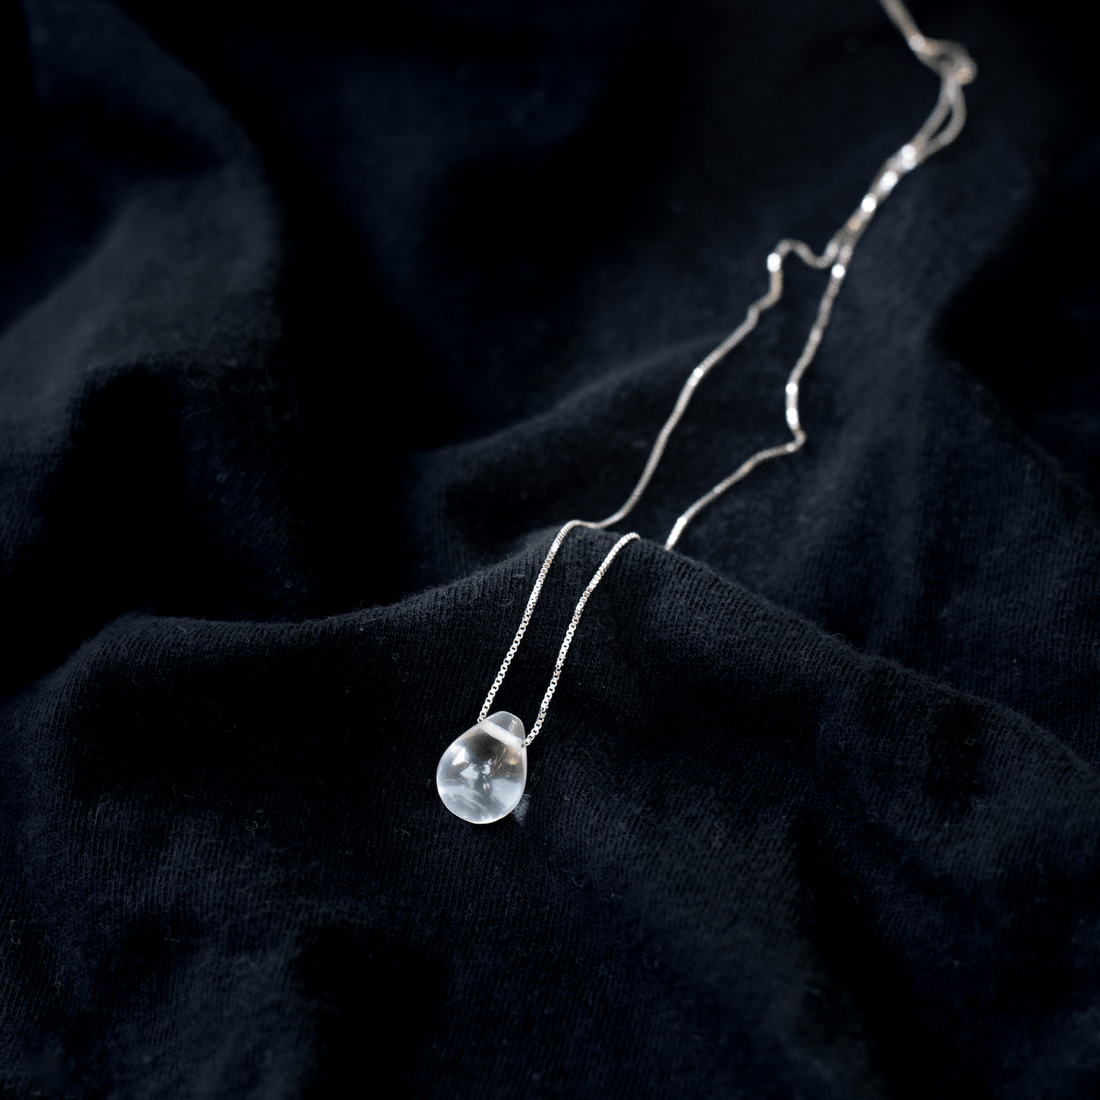 Water Drop Sterling Silver Necklace – Wear The Peace